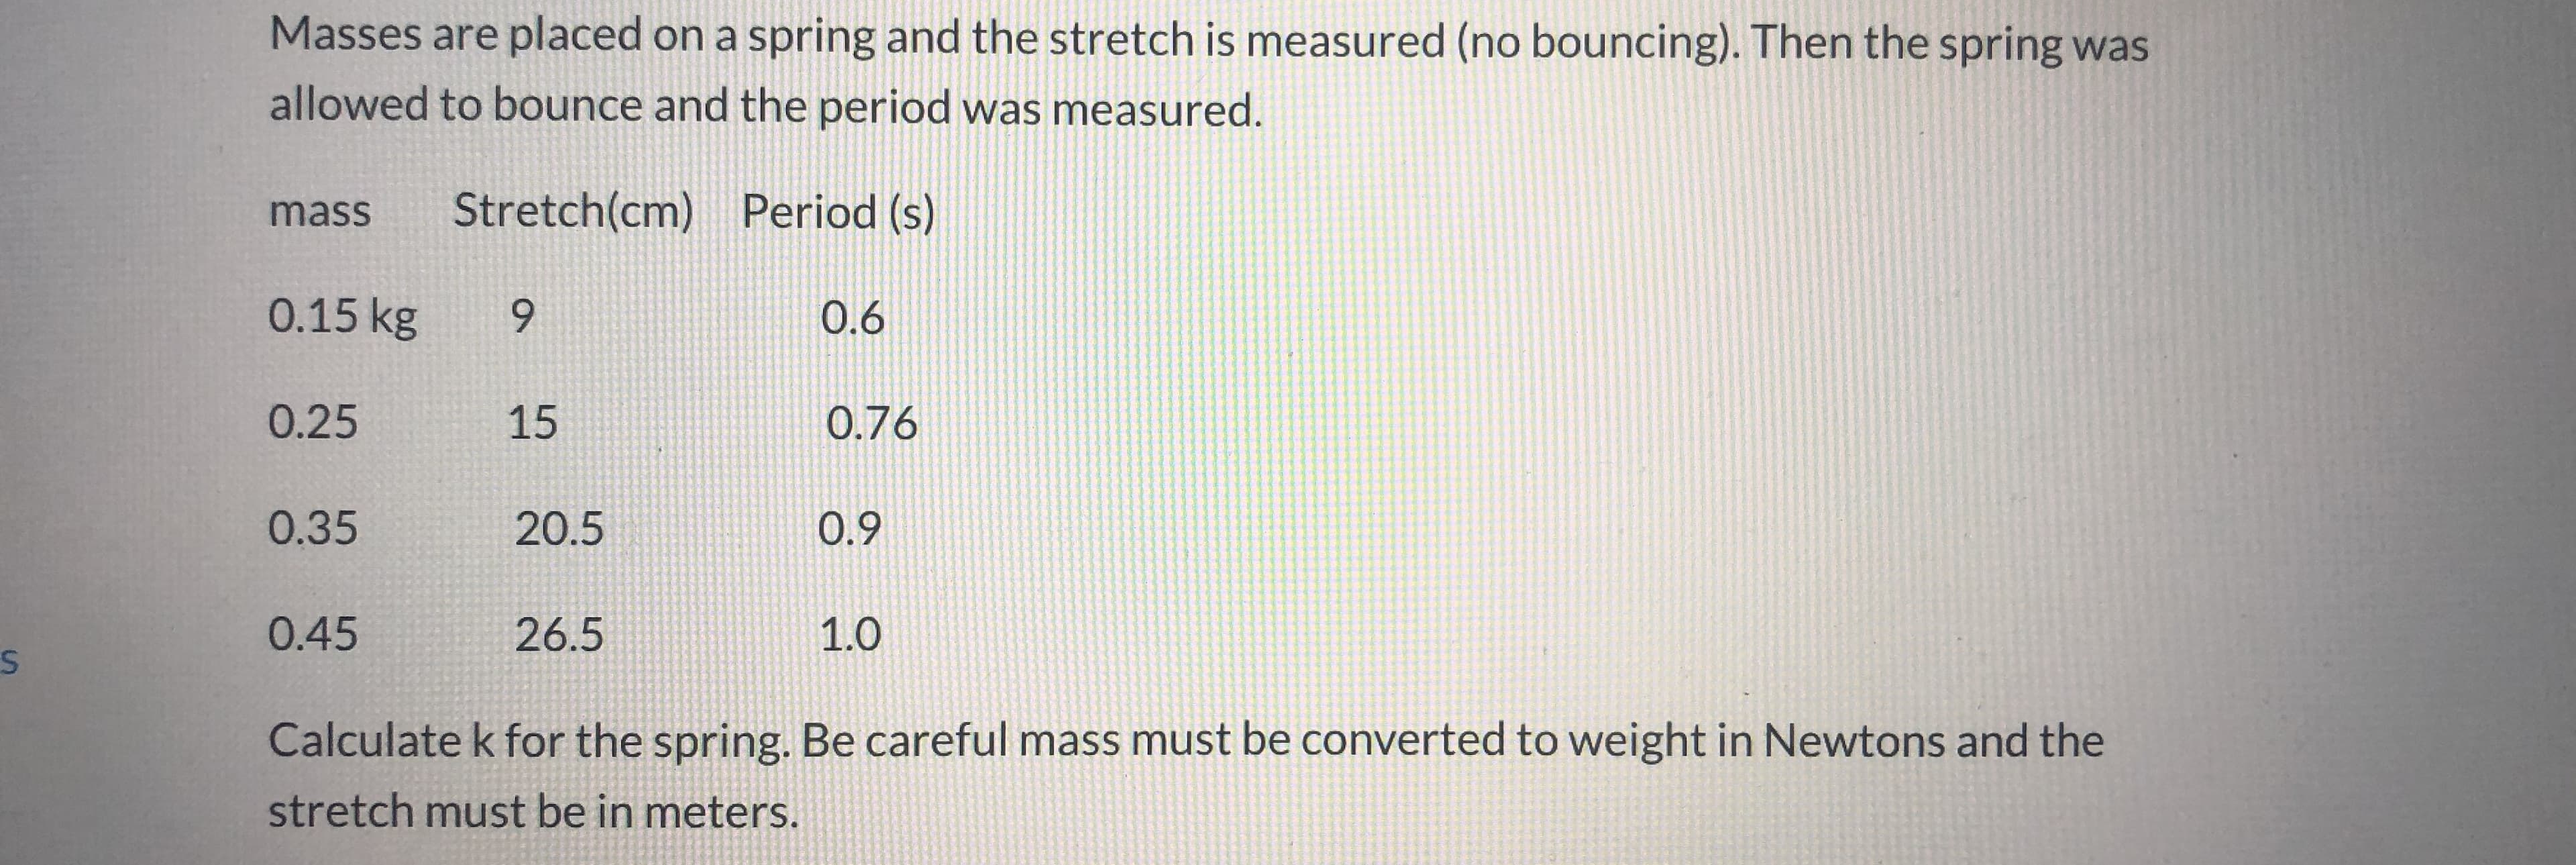 Masses are placed on a spring and the stretch is measured (no bouncing). Then the spring was
allowed to bounce and the period was measured.
mass
Stretch(cm) Period (s)
0.15 kg
6.
0.6
0.25
15
0.76
0.35
20.5
0.9
0.45
26.5
1.0
Calculate k for the spring. Be careful mass must be converted to weight in Newtons and the
stretch must be in meters.
